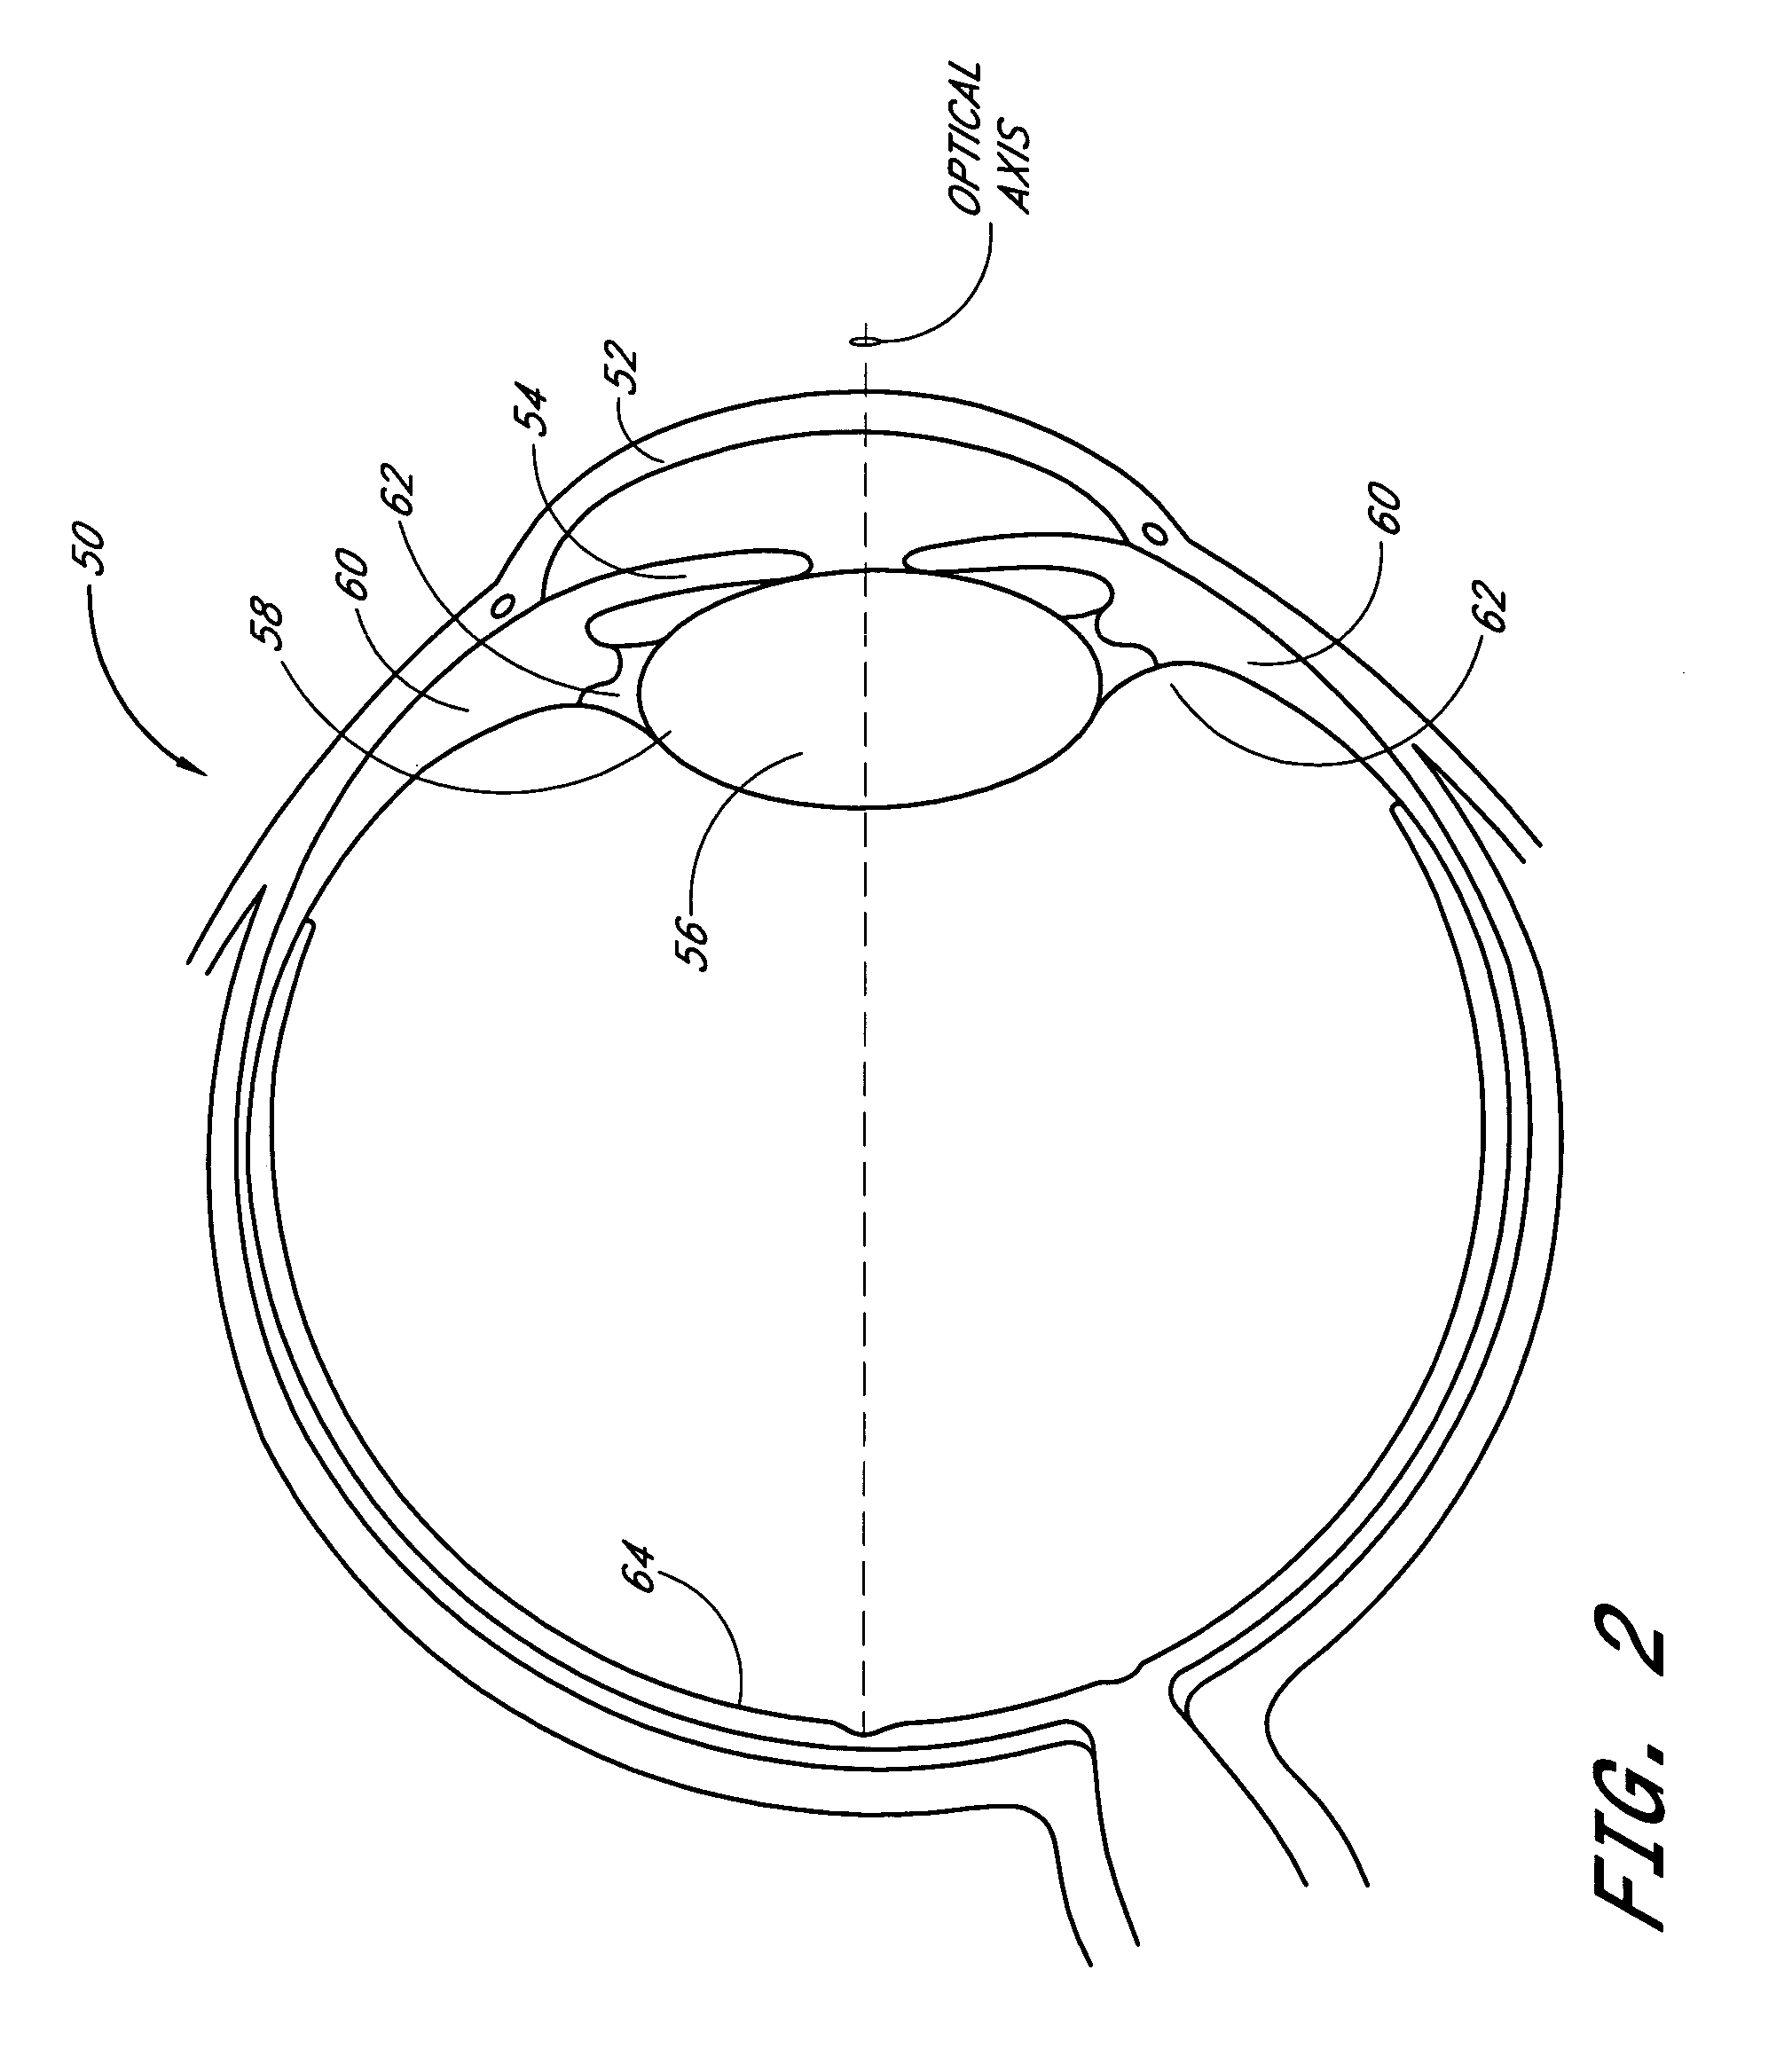 Accommodating intraocular lens system with separation member